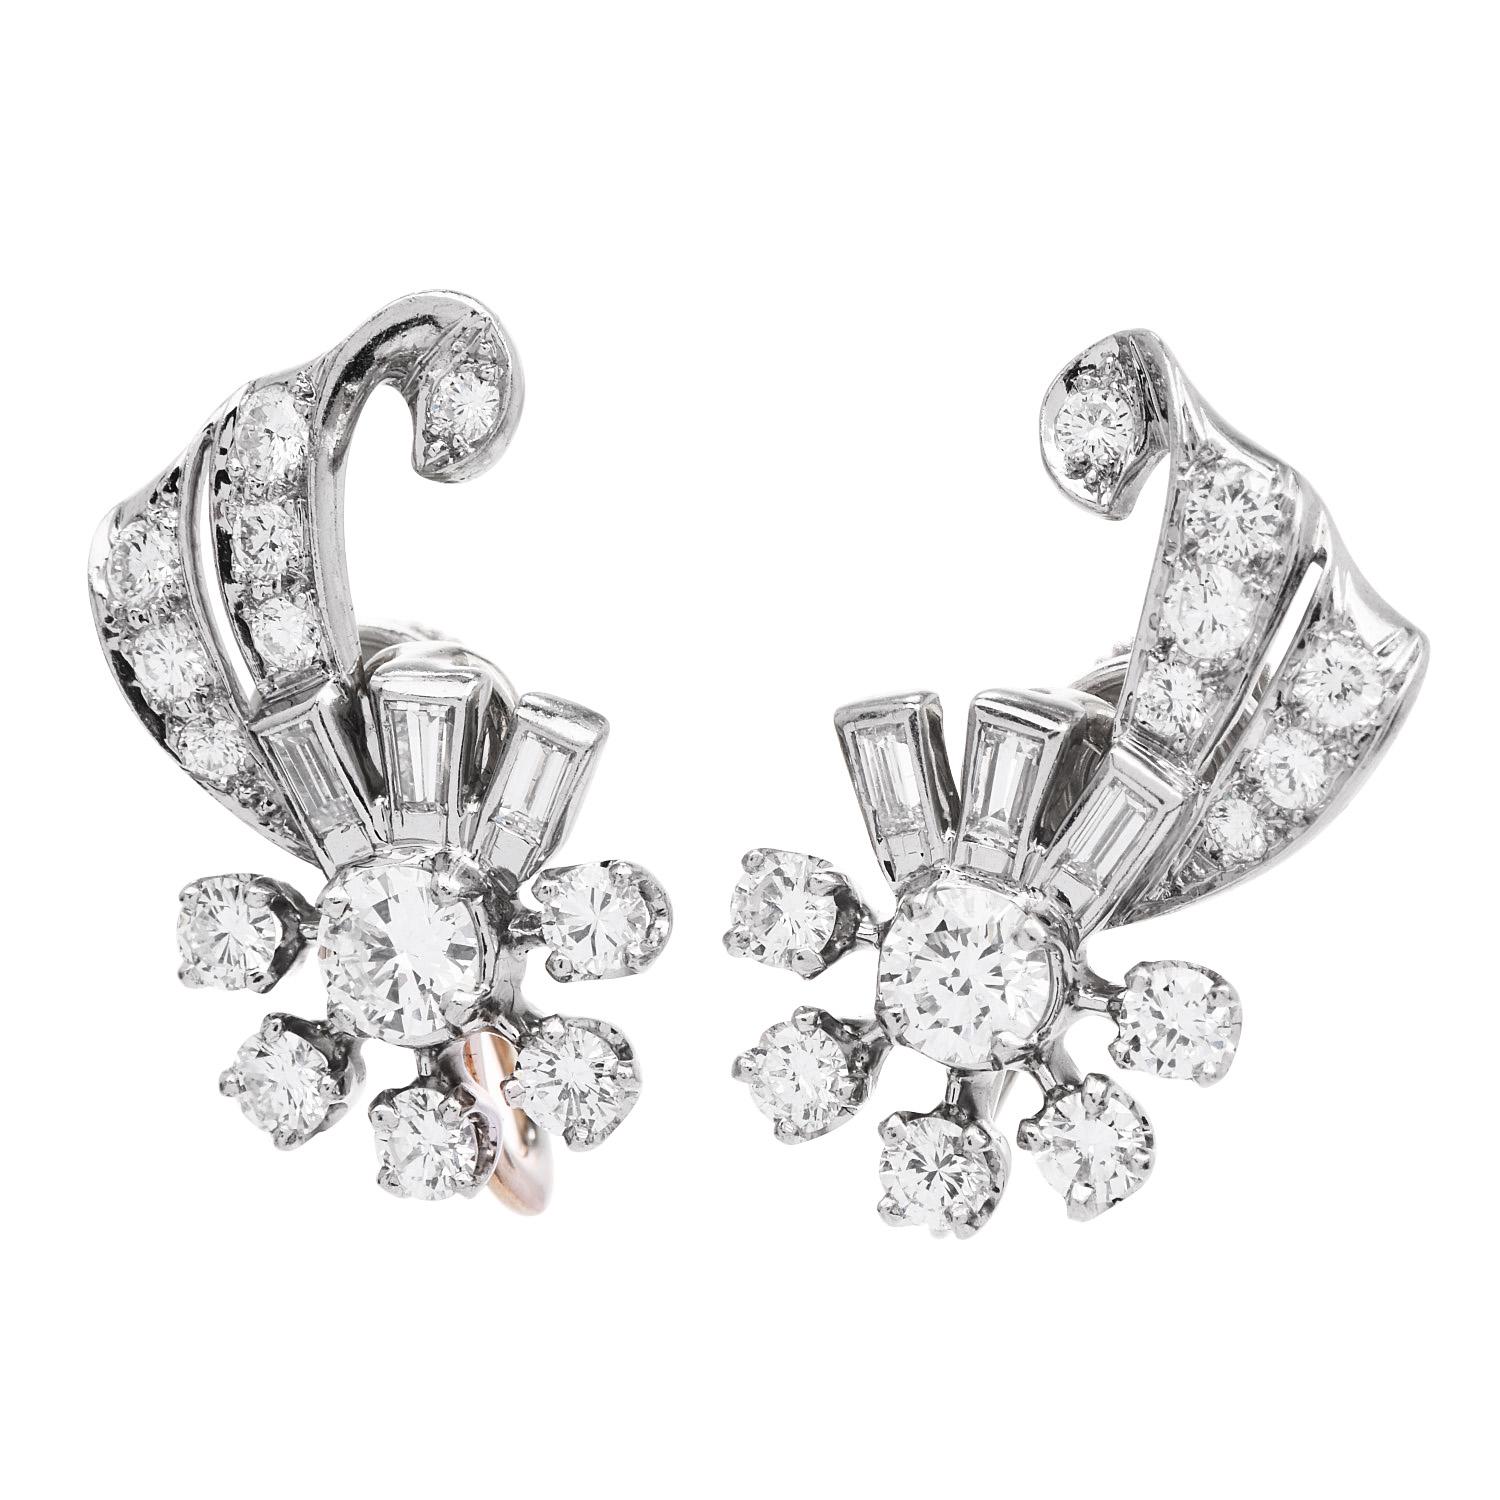 Vintage Art Deco floral & ribbon design earrings. Crafted in Solid Platinum, Complementing the look are (26) round-cut & (6) baguette-cut diamonds weighing approximately 1.90 carats (G-H color and VS clarity)

They measure approximately 21 mm x 13